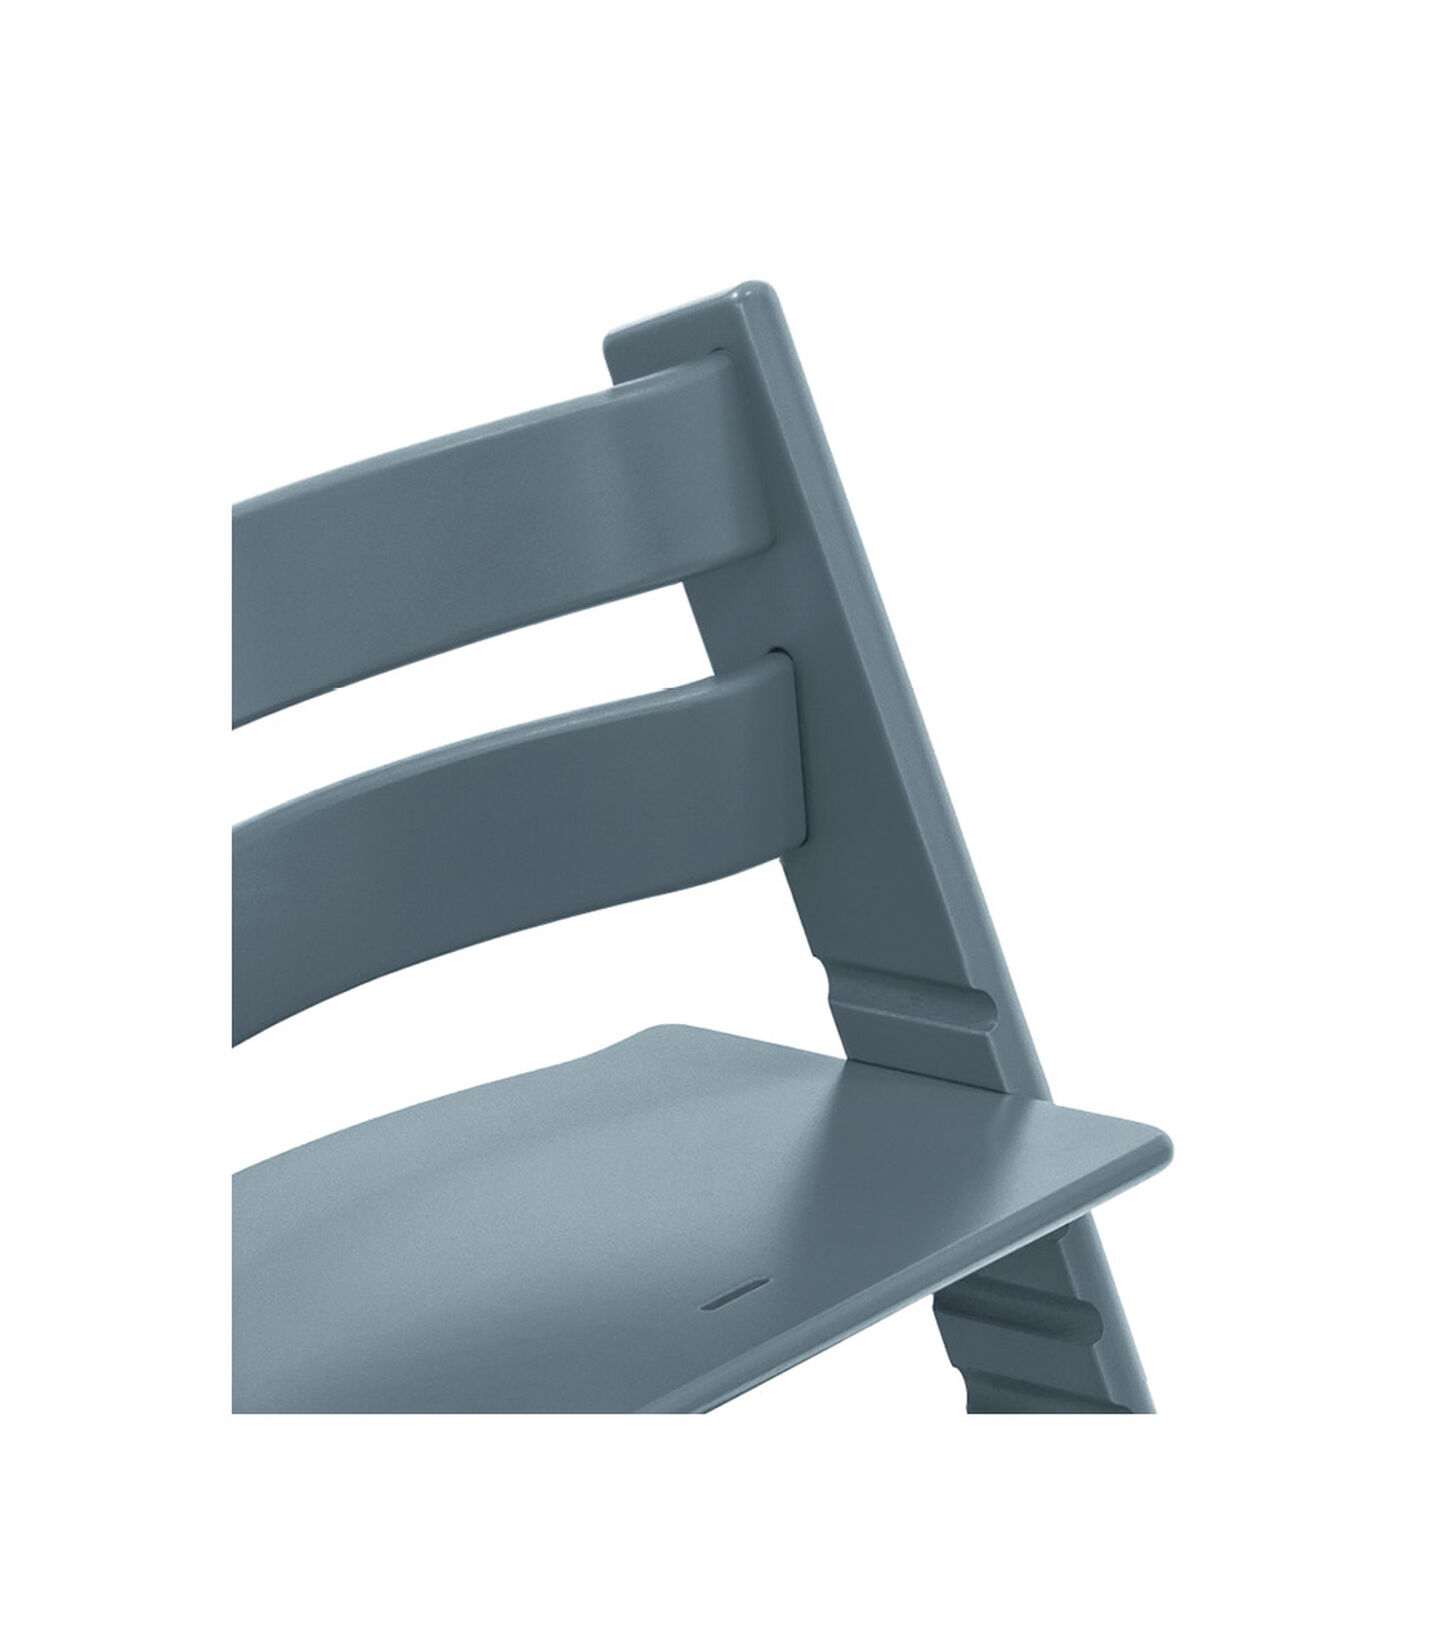 Tripp Trapp® Chair Fjord Blue, Fjord Blue, mainview view 4